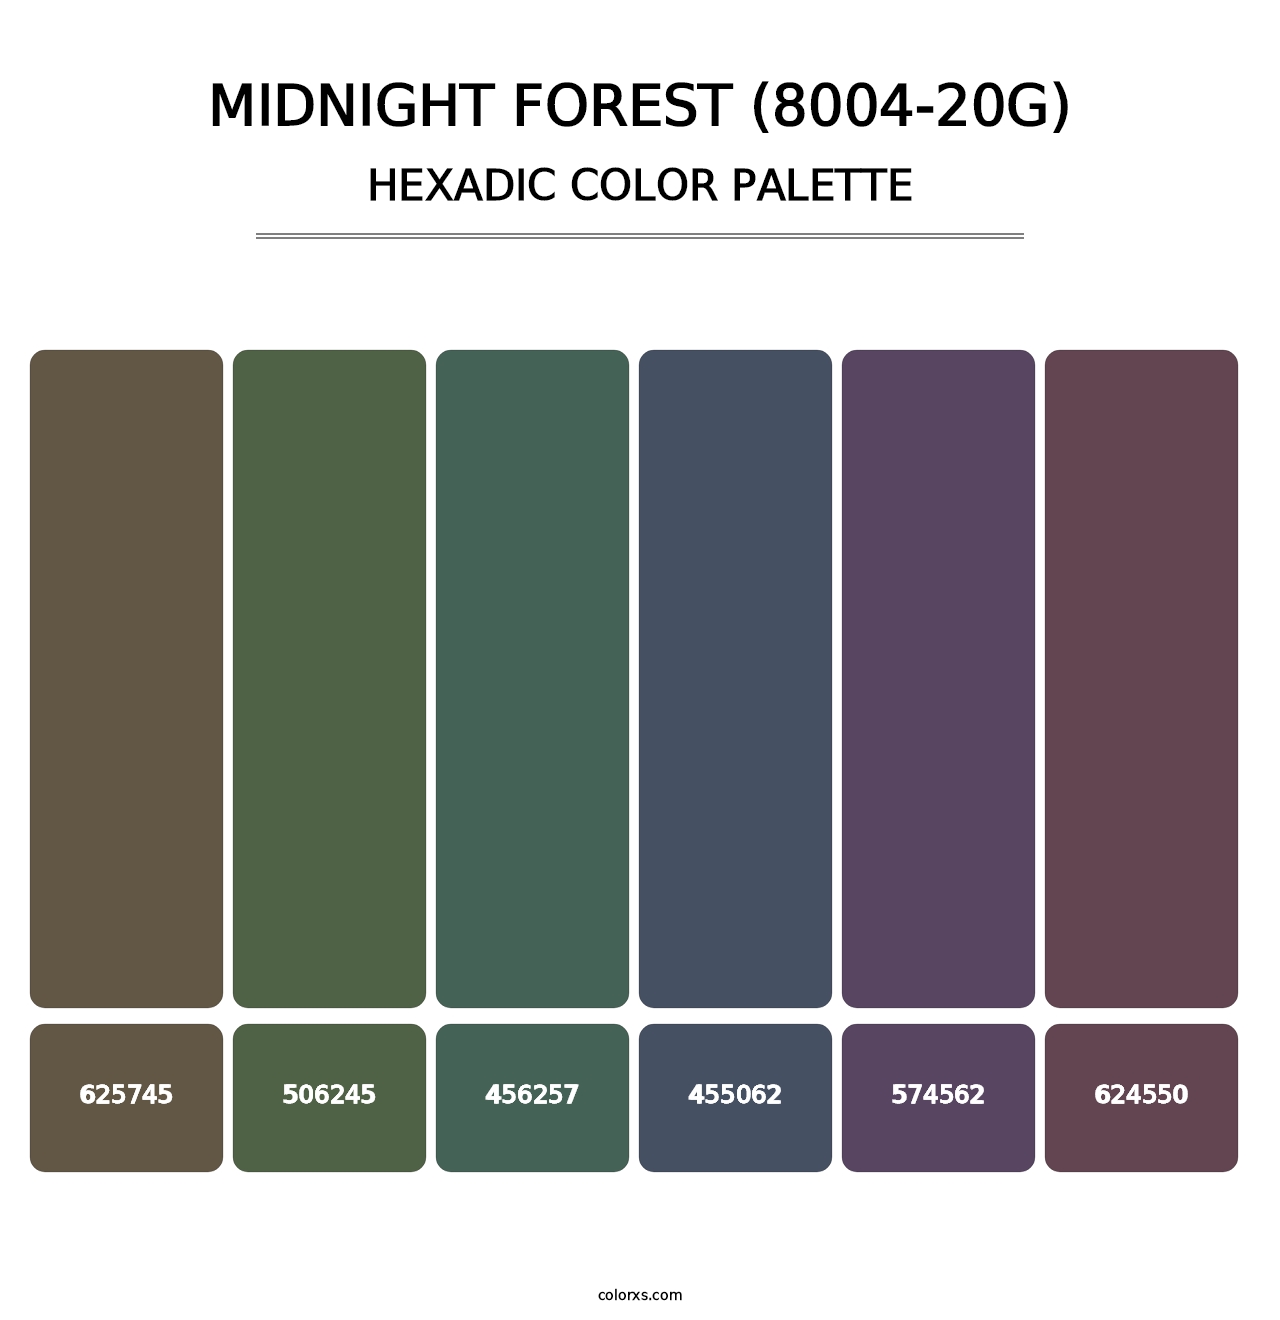 Midnight Forest (8004-20G) - Hexadic Color Palette